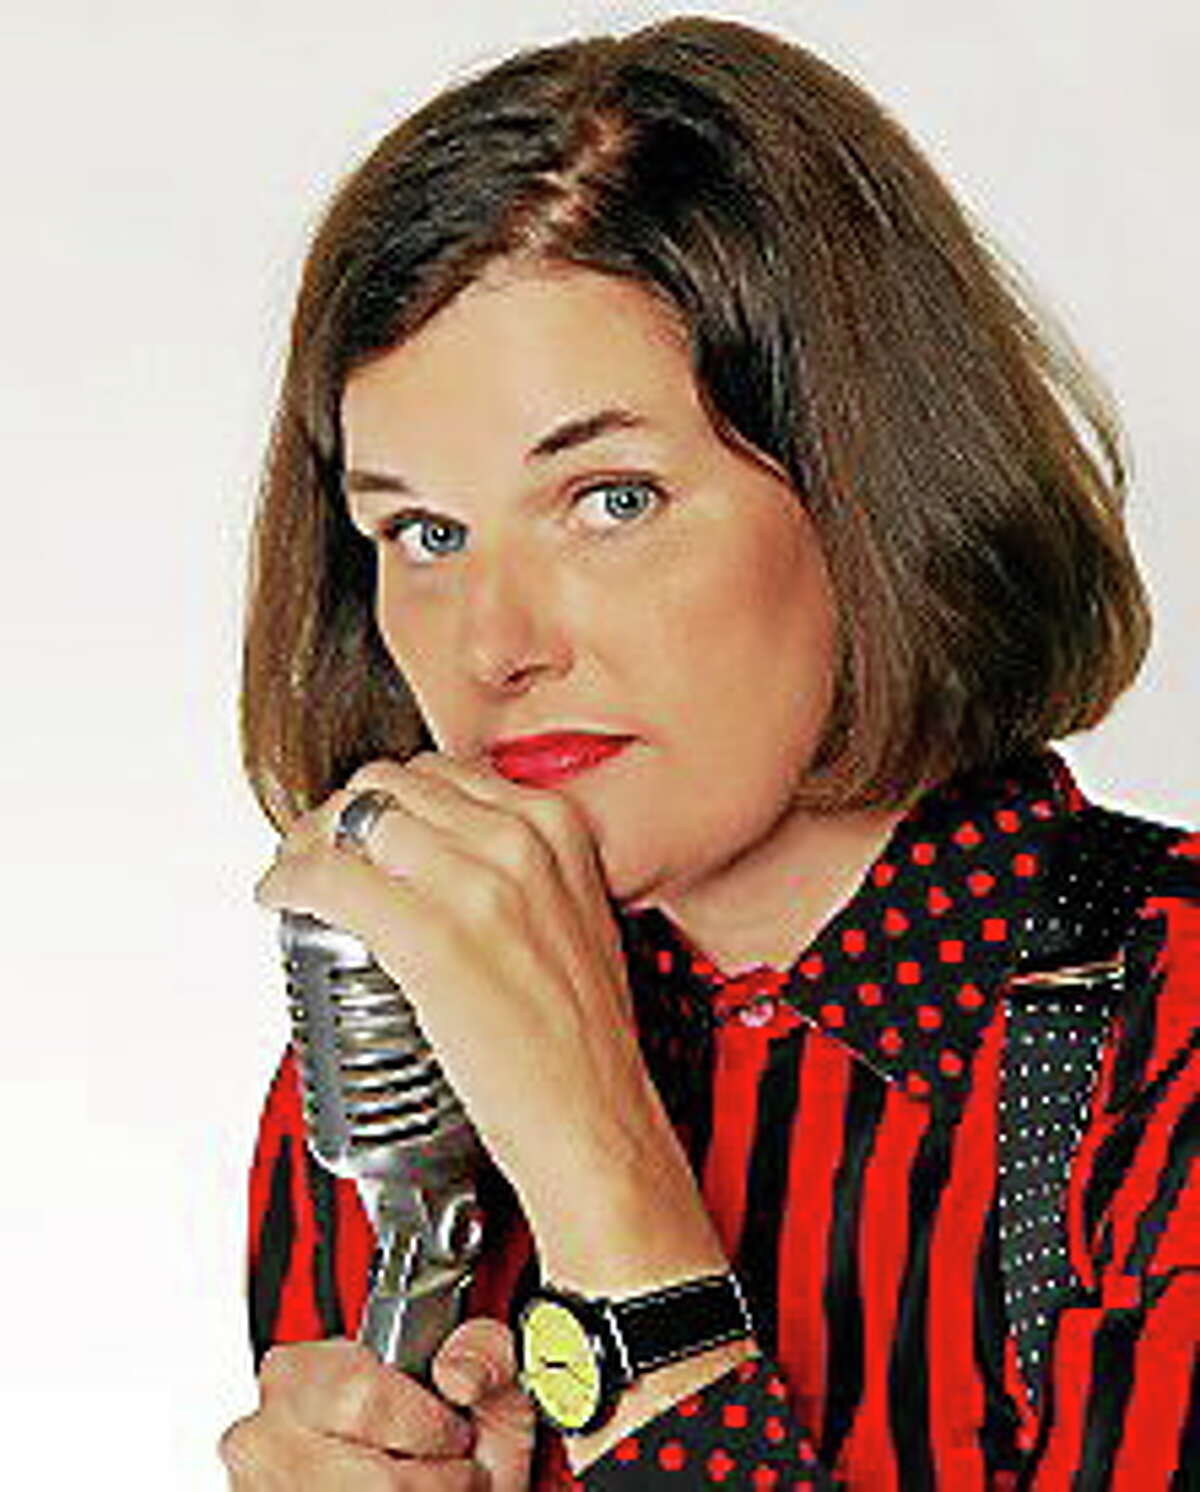 Contributed photo - Infinity Music Hall Comedian Paula Poundstone is performing at Infinity Music Hall in Norfolk in September.